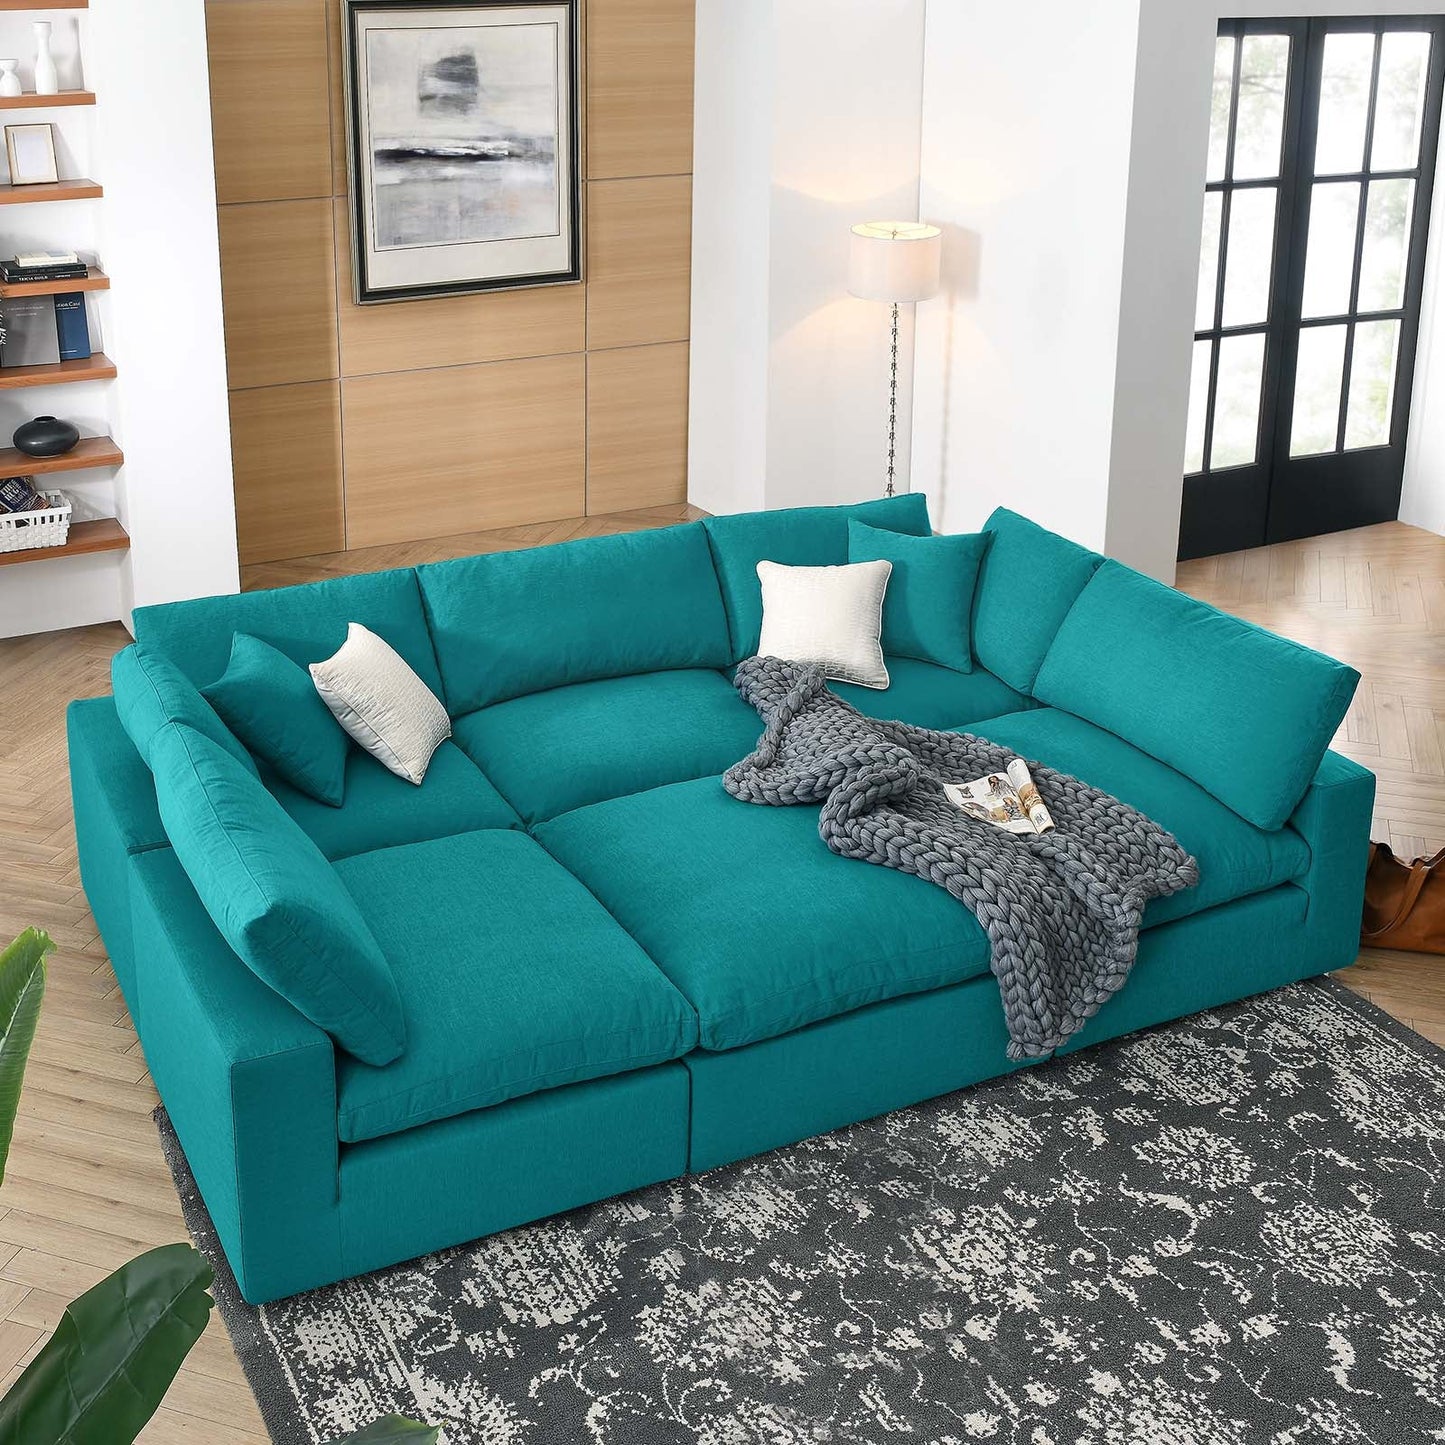 Commix Down-Filled Overstuffed 6-Piece Sectional Sofa